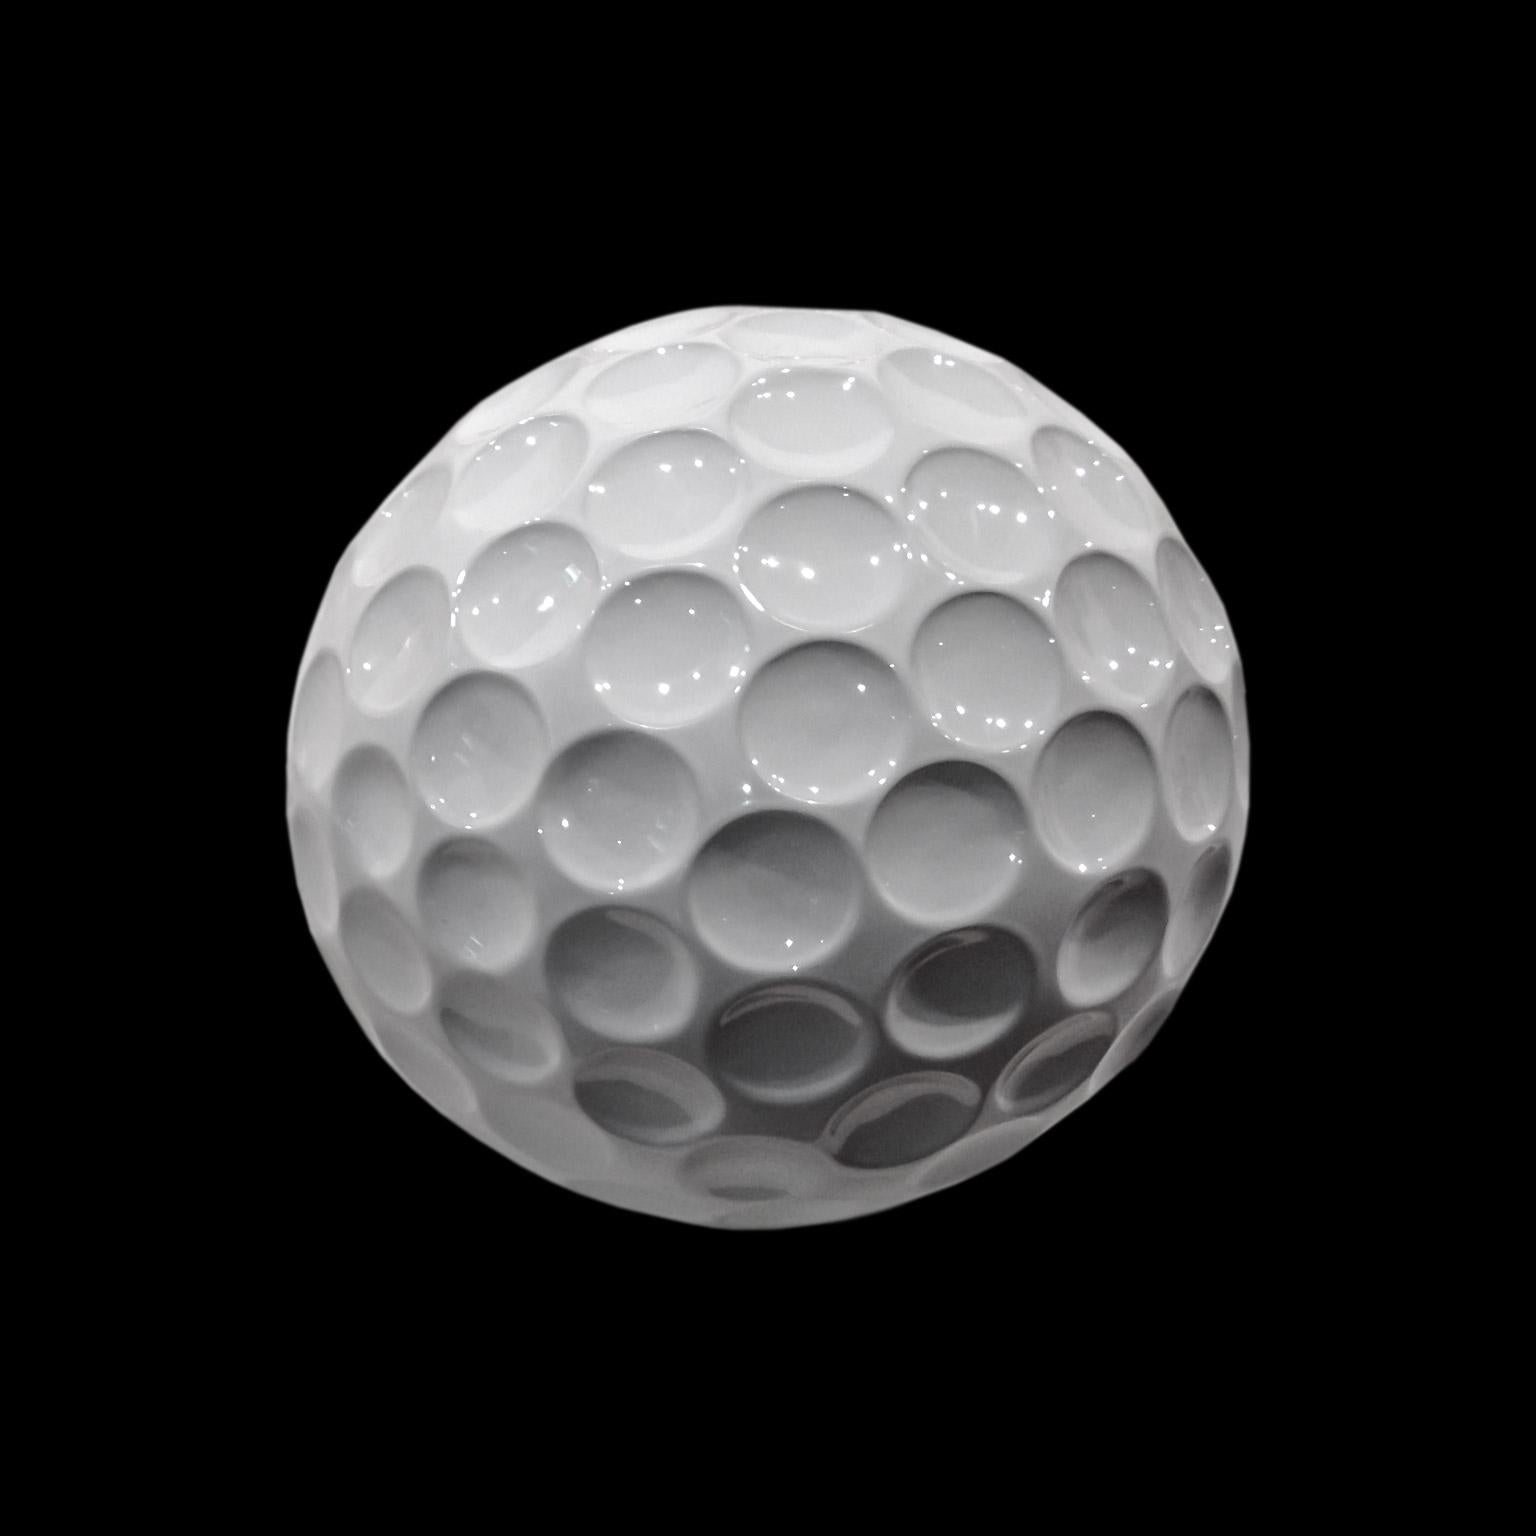 Albetros - Ceramic golf ball handcrafted in white enamel

code GB040, measures: H 40.0, Dm 40.0 cm.

Finishes: colors glazed or 24 carat gold, platinum or bronze

Also available in a smaller size : Dm 15 cm.

Please do not hesitate to contact us if